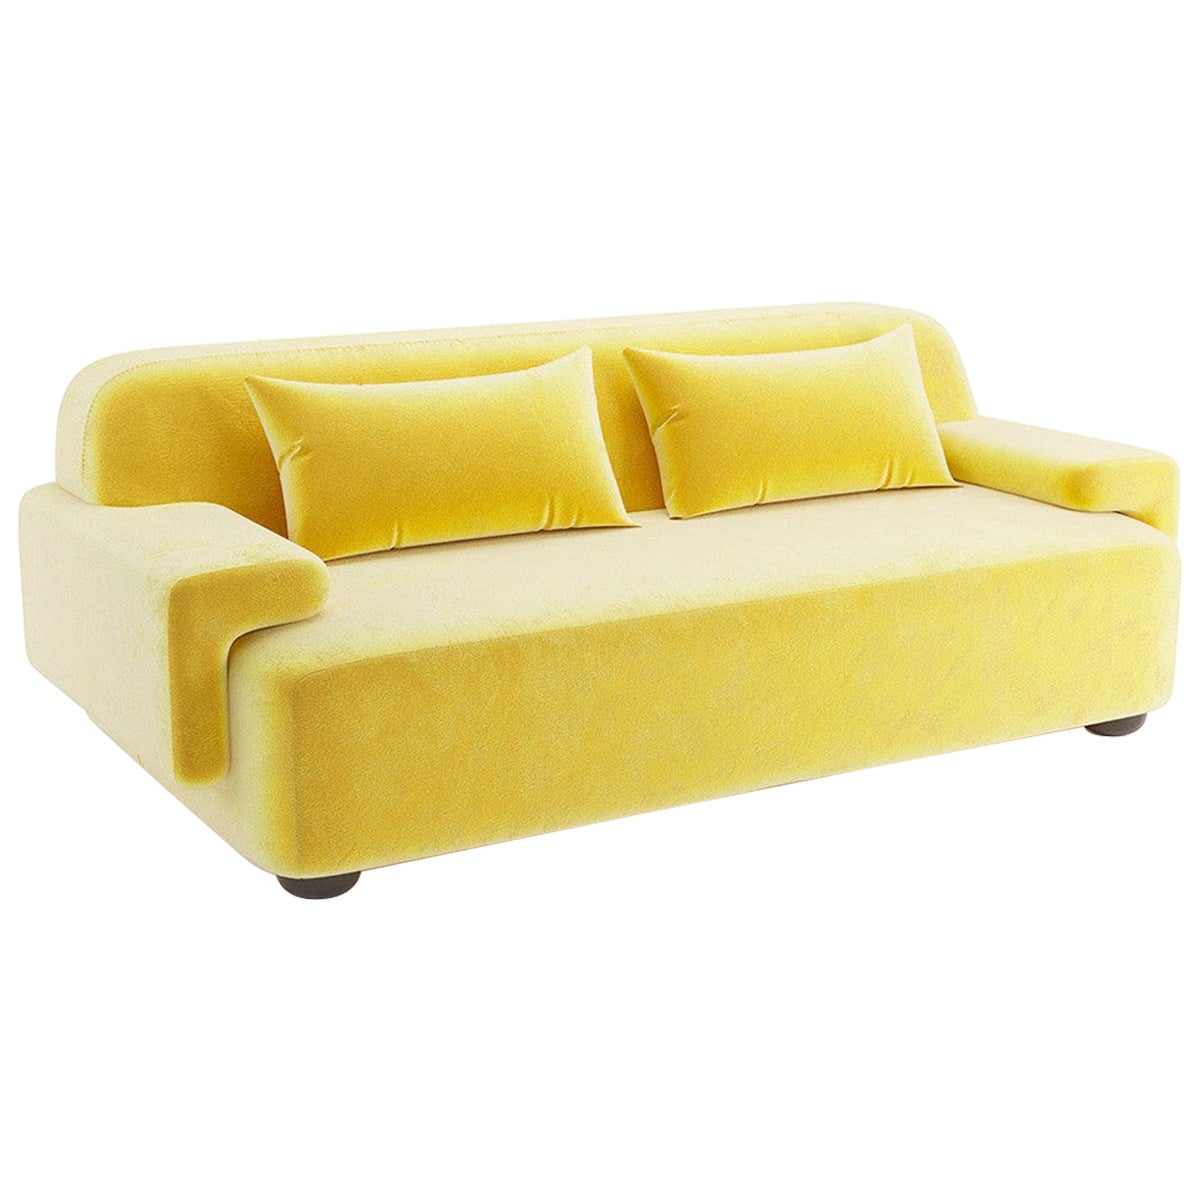 Popus Editions Lena 4 Seater Sofa in Yellow Como Velvet Upholstery For Sale